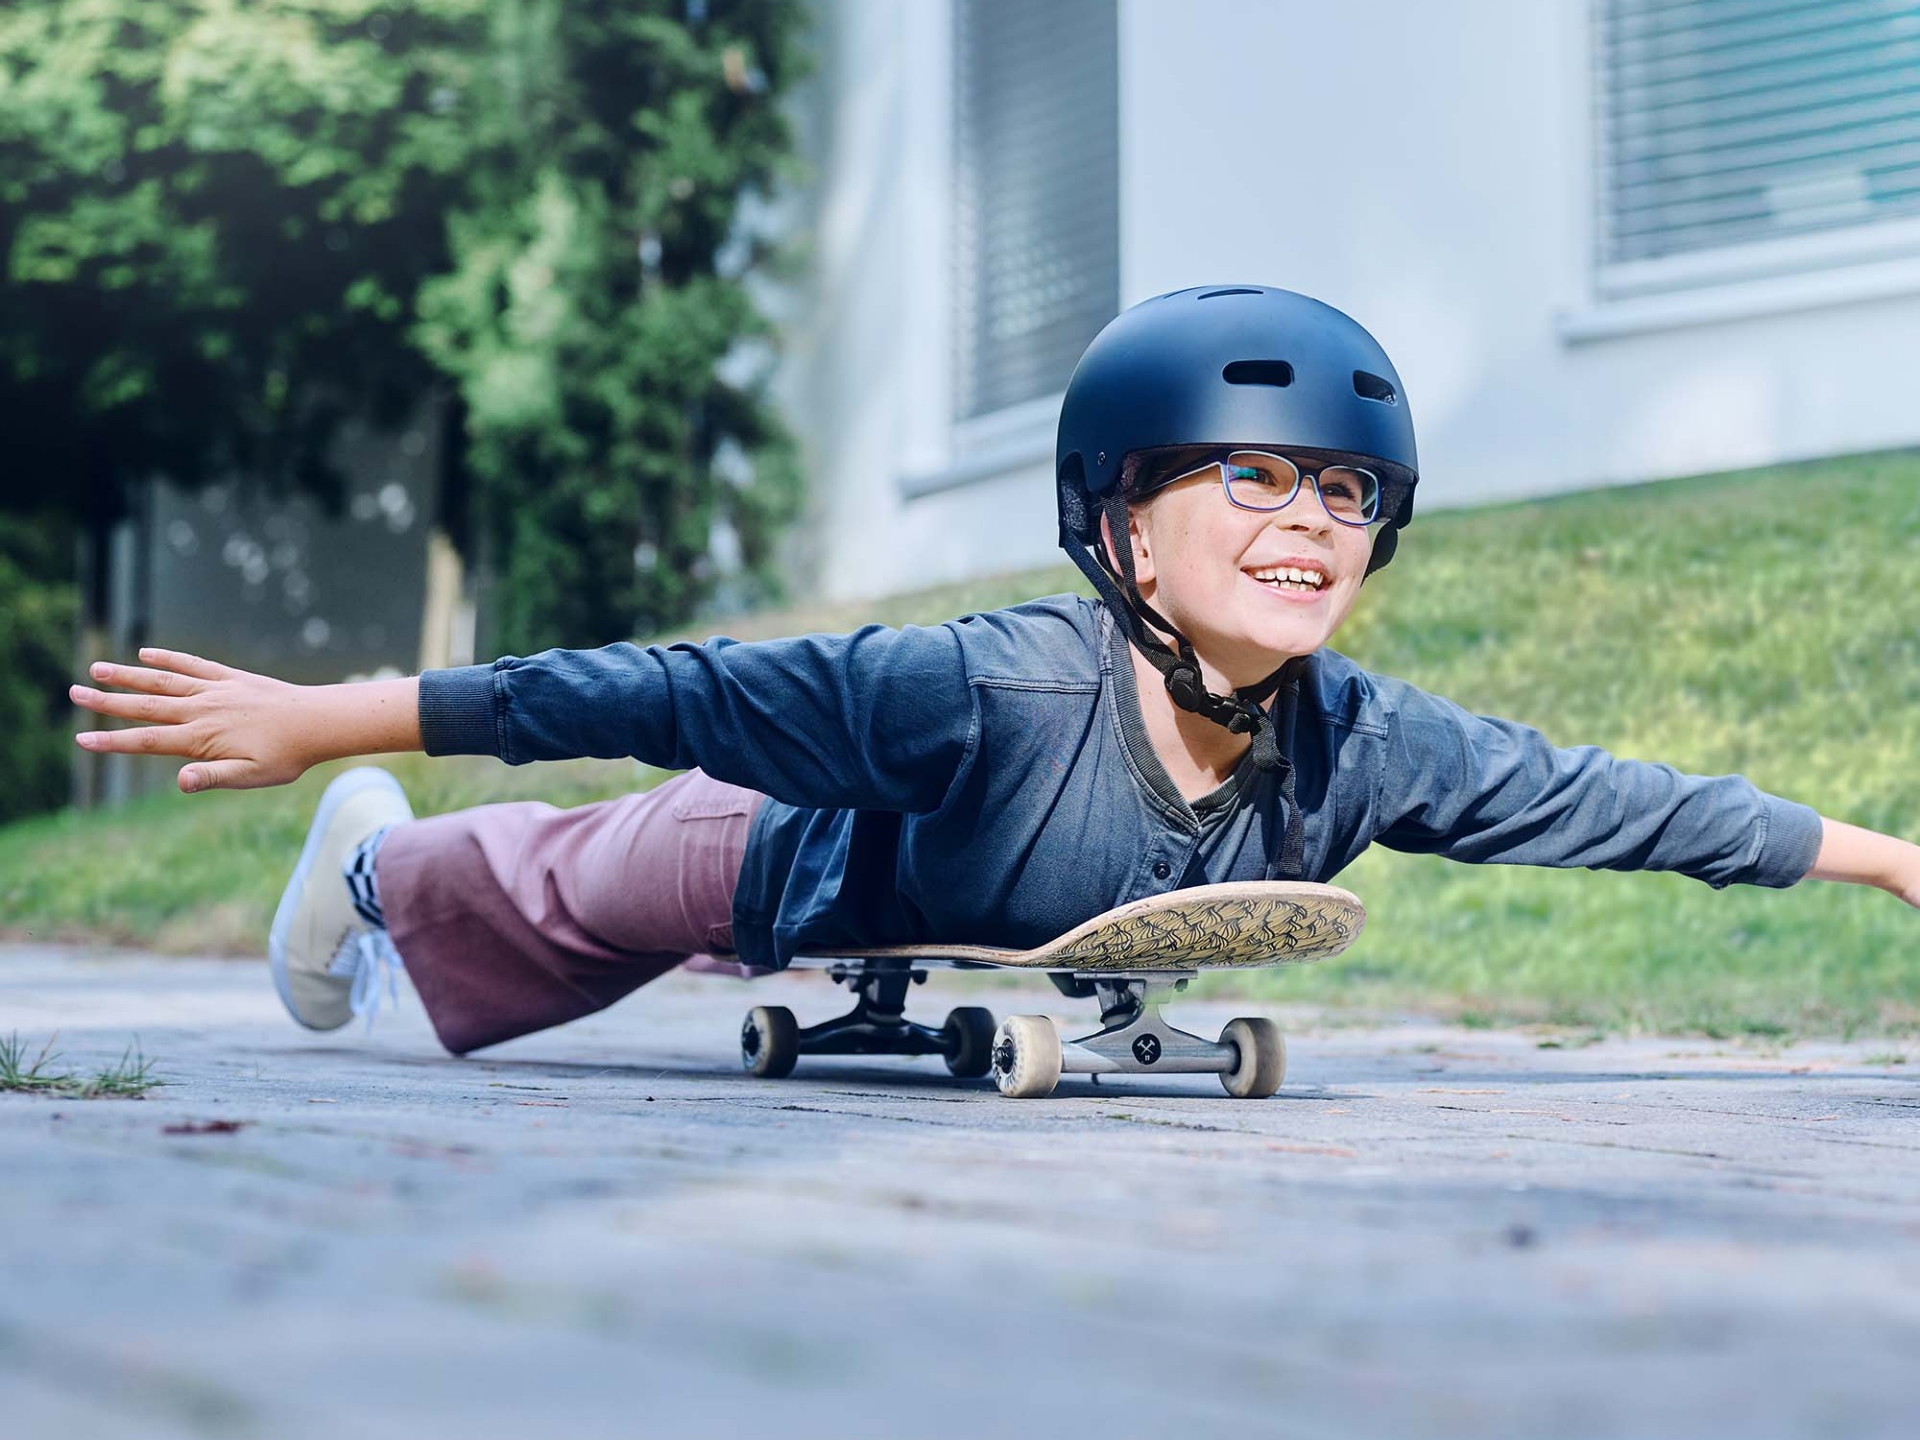 A girls with a helmet and glasses rolls lying on a skateboard down the road and stretches her arms out.